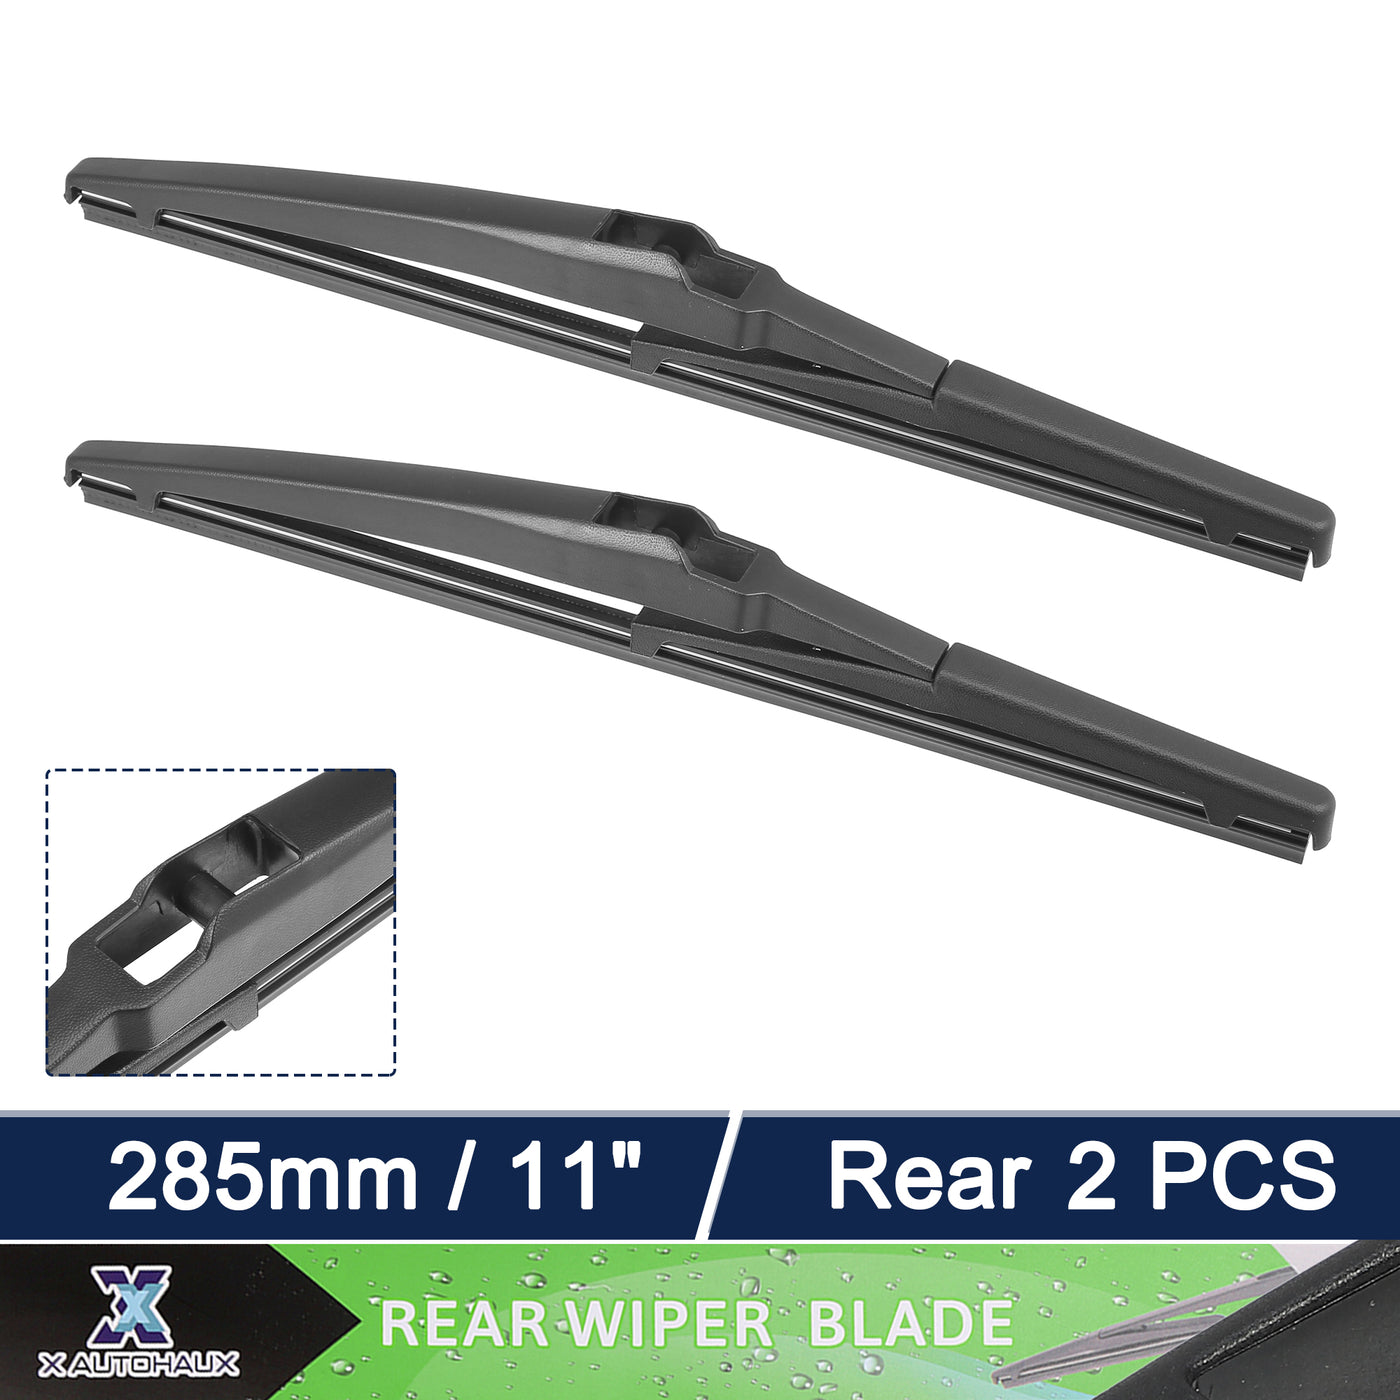 X AUTOHAUX 2pcs Rear Windshield Wiper Blade Replacement for Chevrolet HHR 2006-2011 for Jeep Grand Cherokee 2014-2022 for Hyundai Accent Hatchback 2012-2016